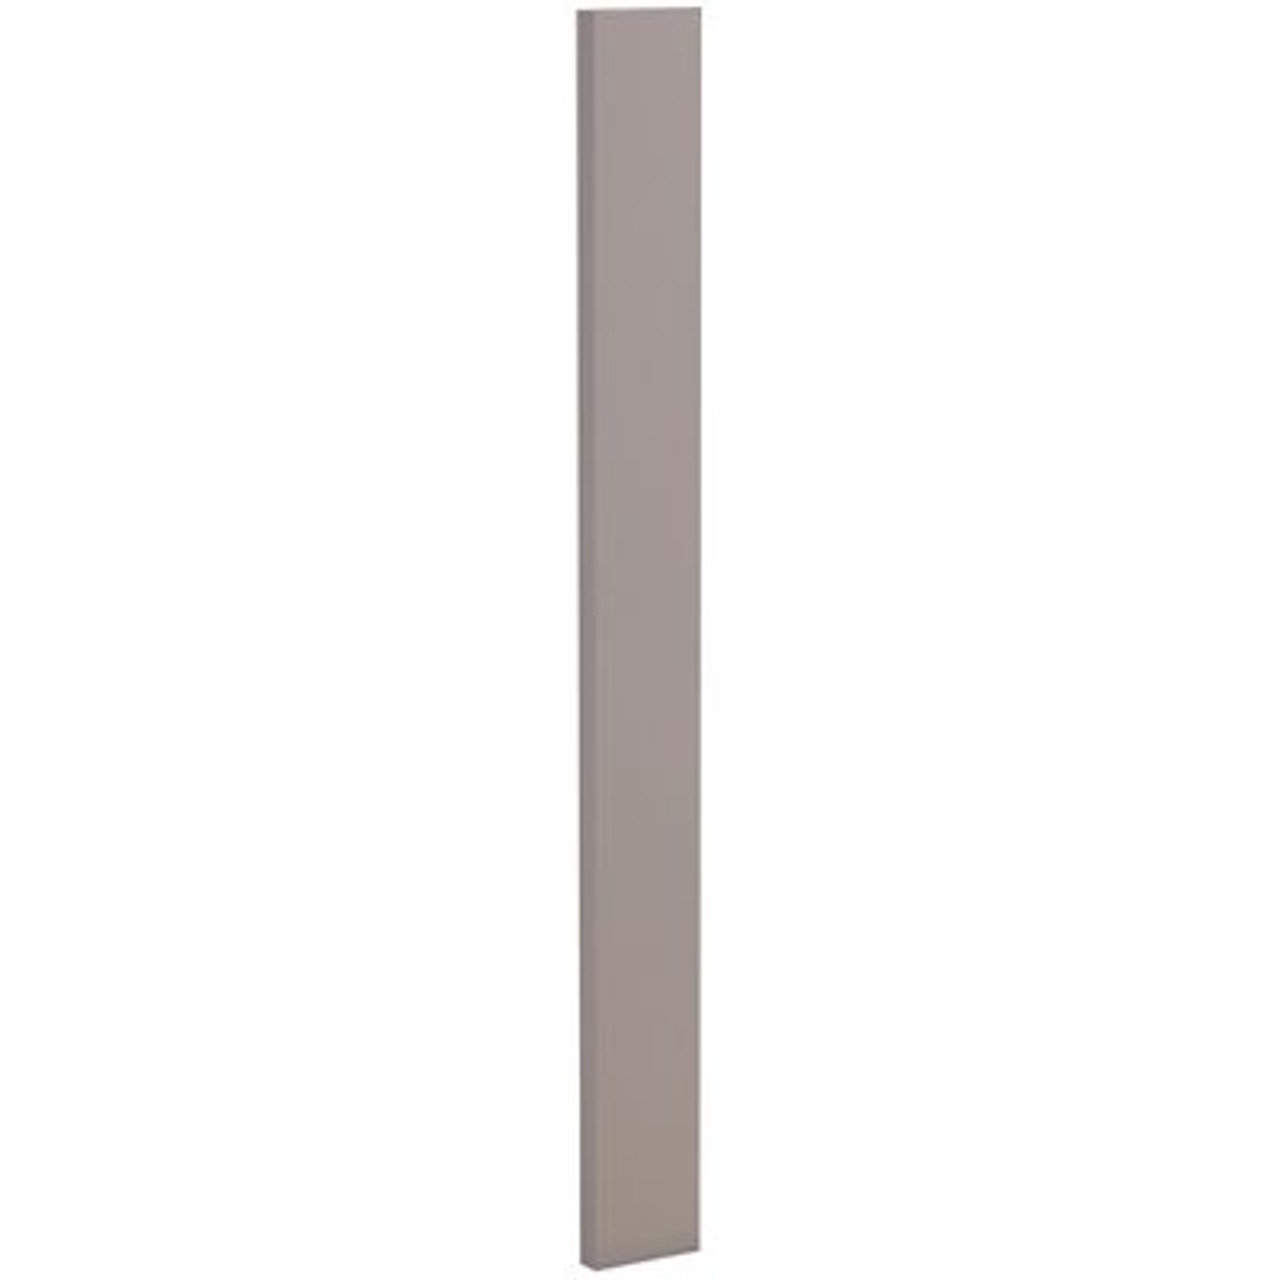 Arlington Veiled Grey Shaker Assembled Plywood 6 In. X 30 In. X 0.75 In. Kitchen Cabinet Filler Strip